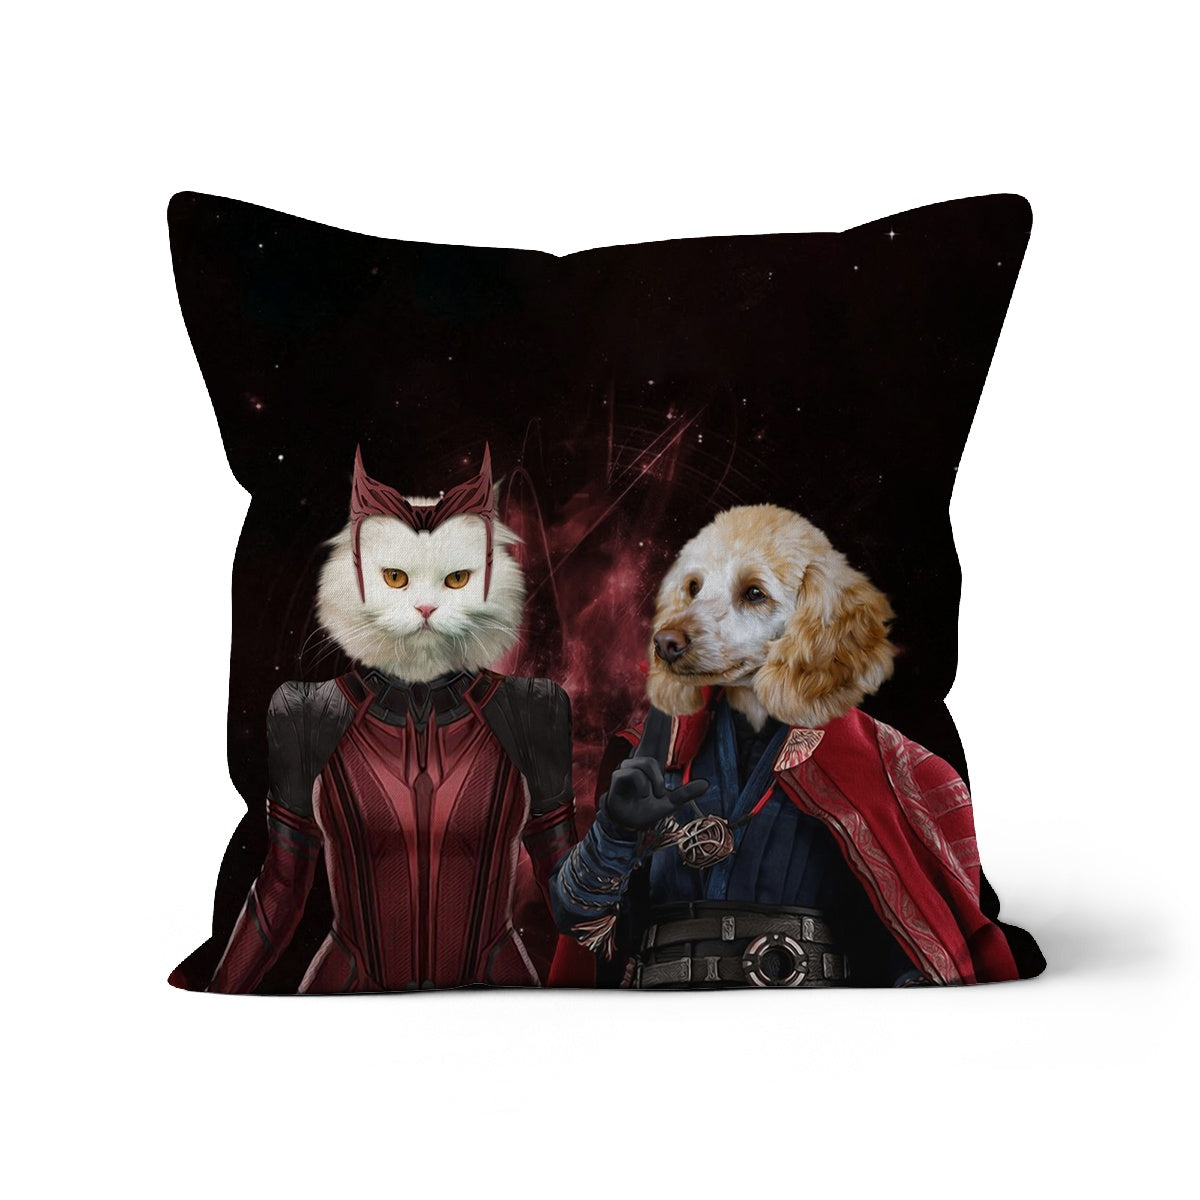 Thor & Wanda, Paw & Glory, paw and glory, pet pillow photo, pillow of your pet, pillow that looks like your dog, create your own pillow, dog on a pillow, pillow with dog, Pet Portrait cushion